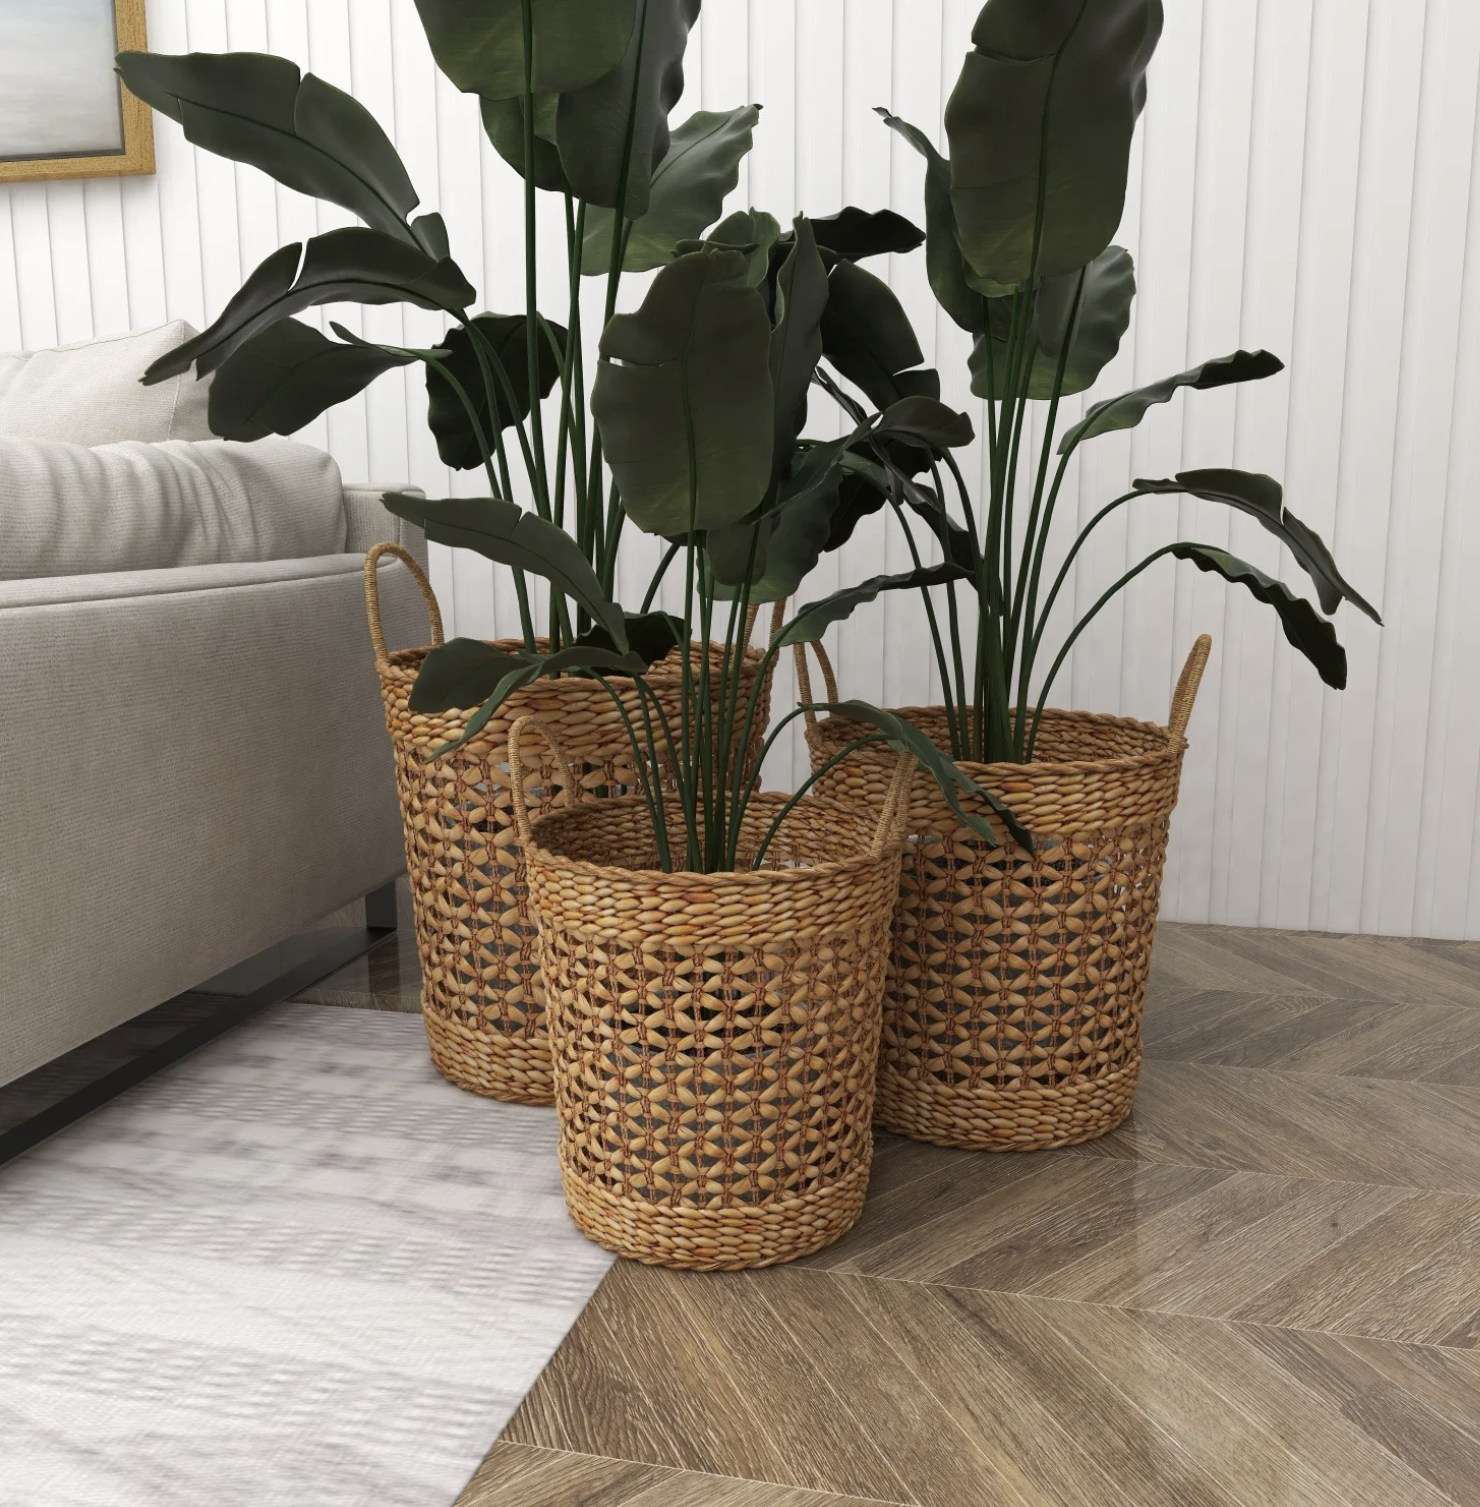 The three baskets with plants in them